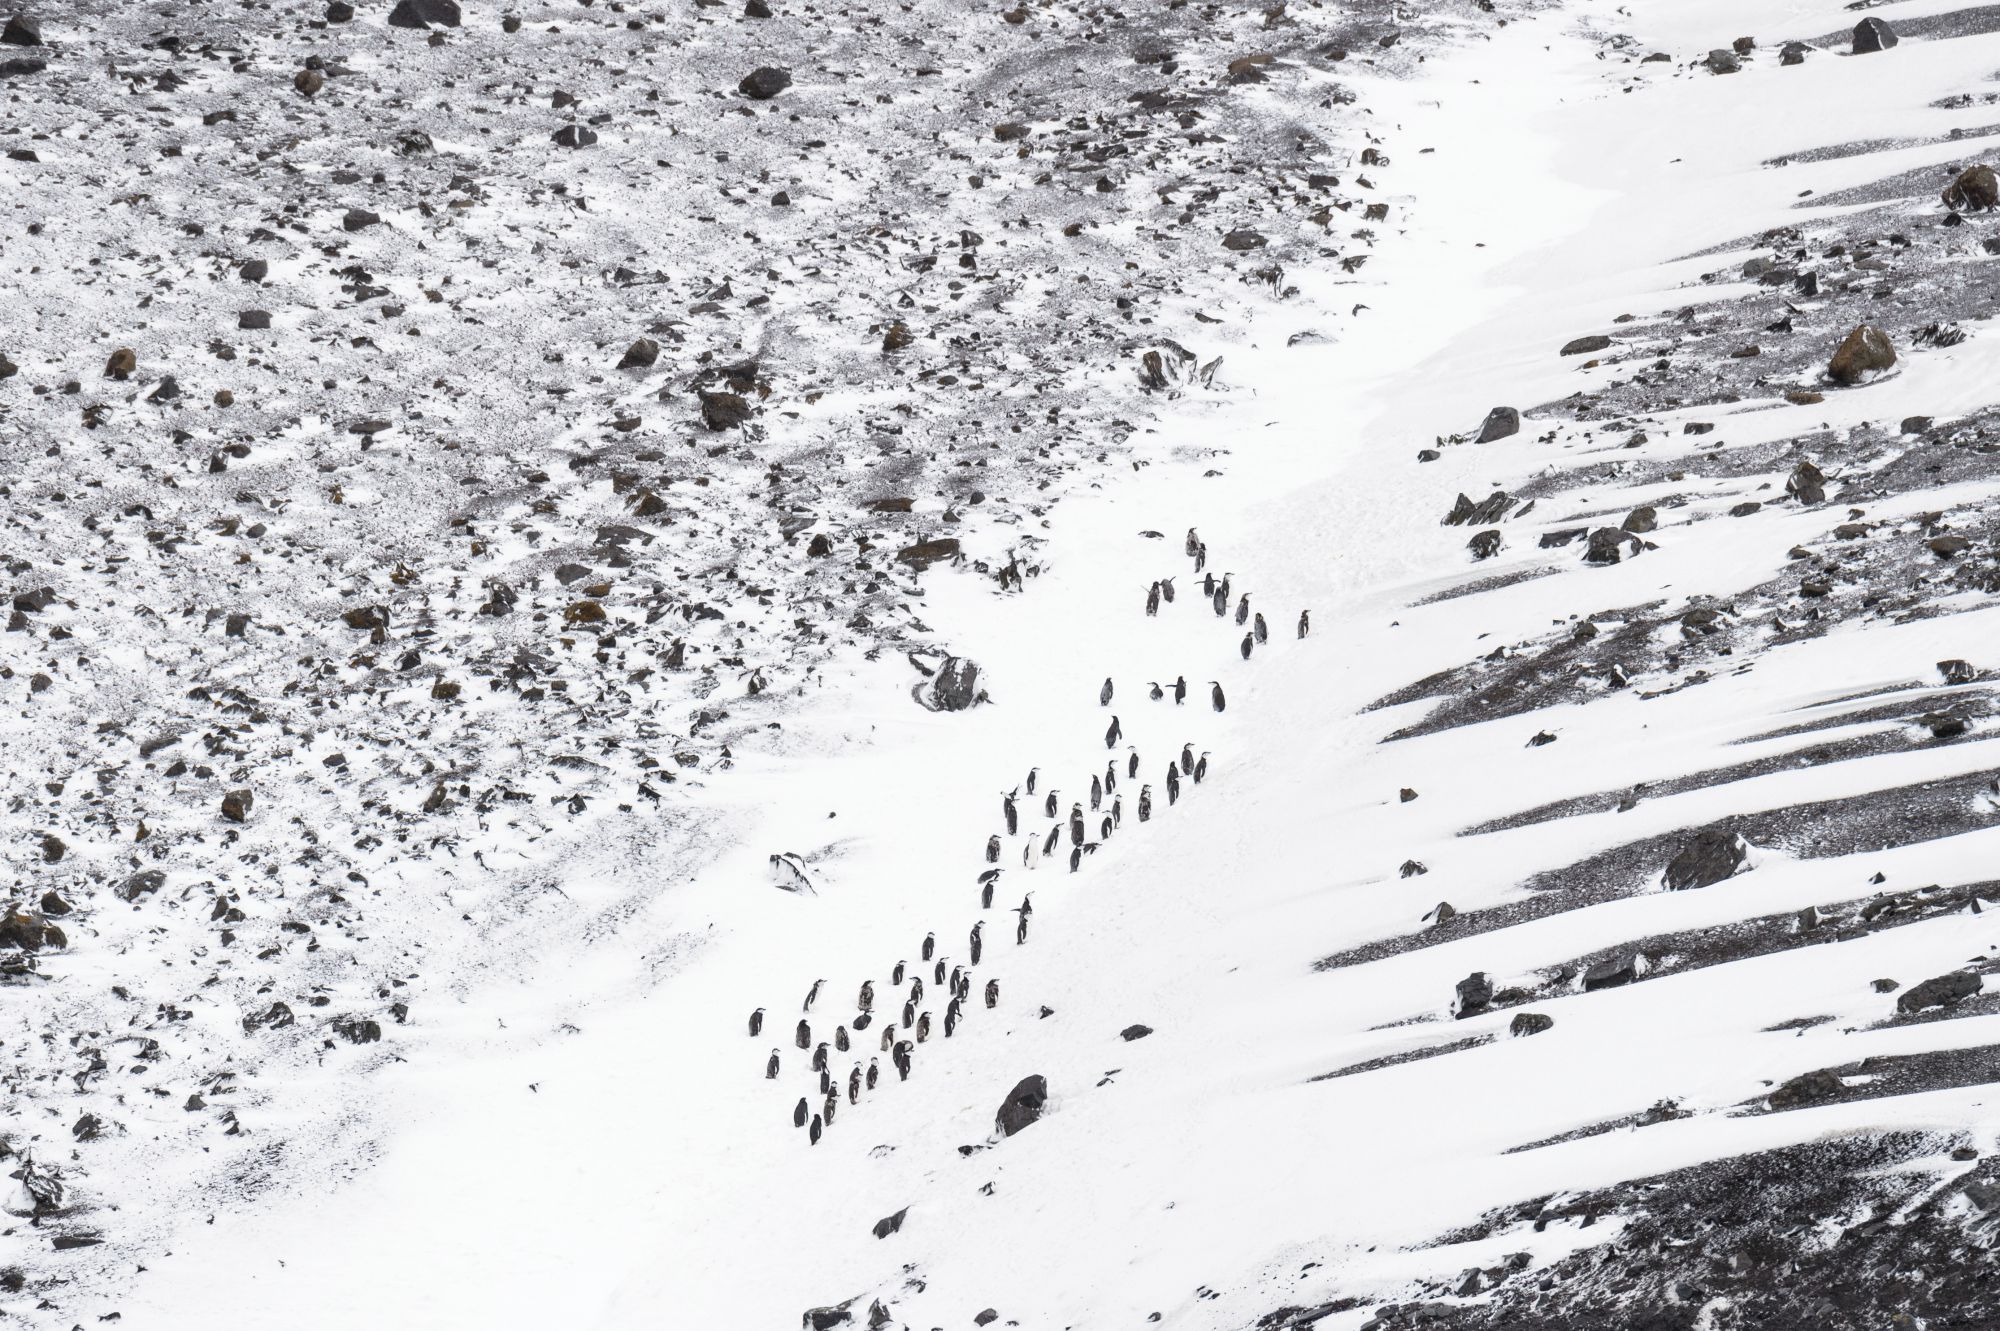 Chinstrap penguin colony